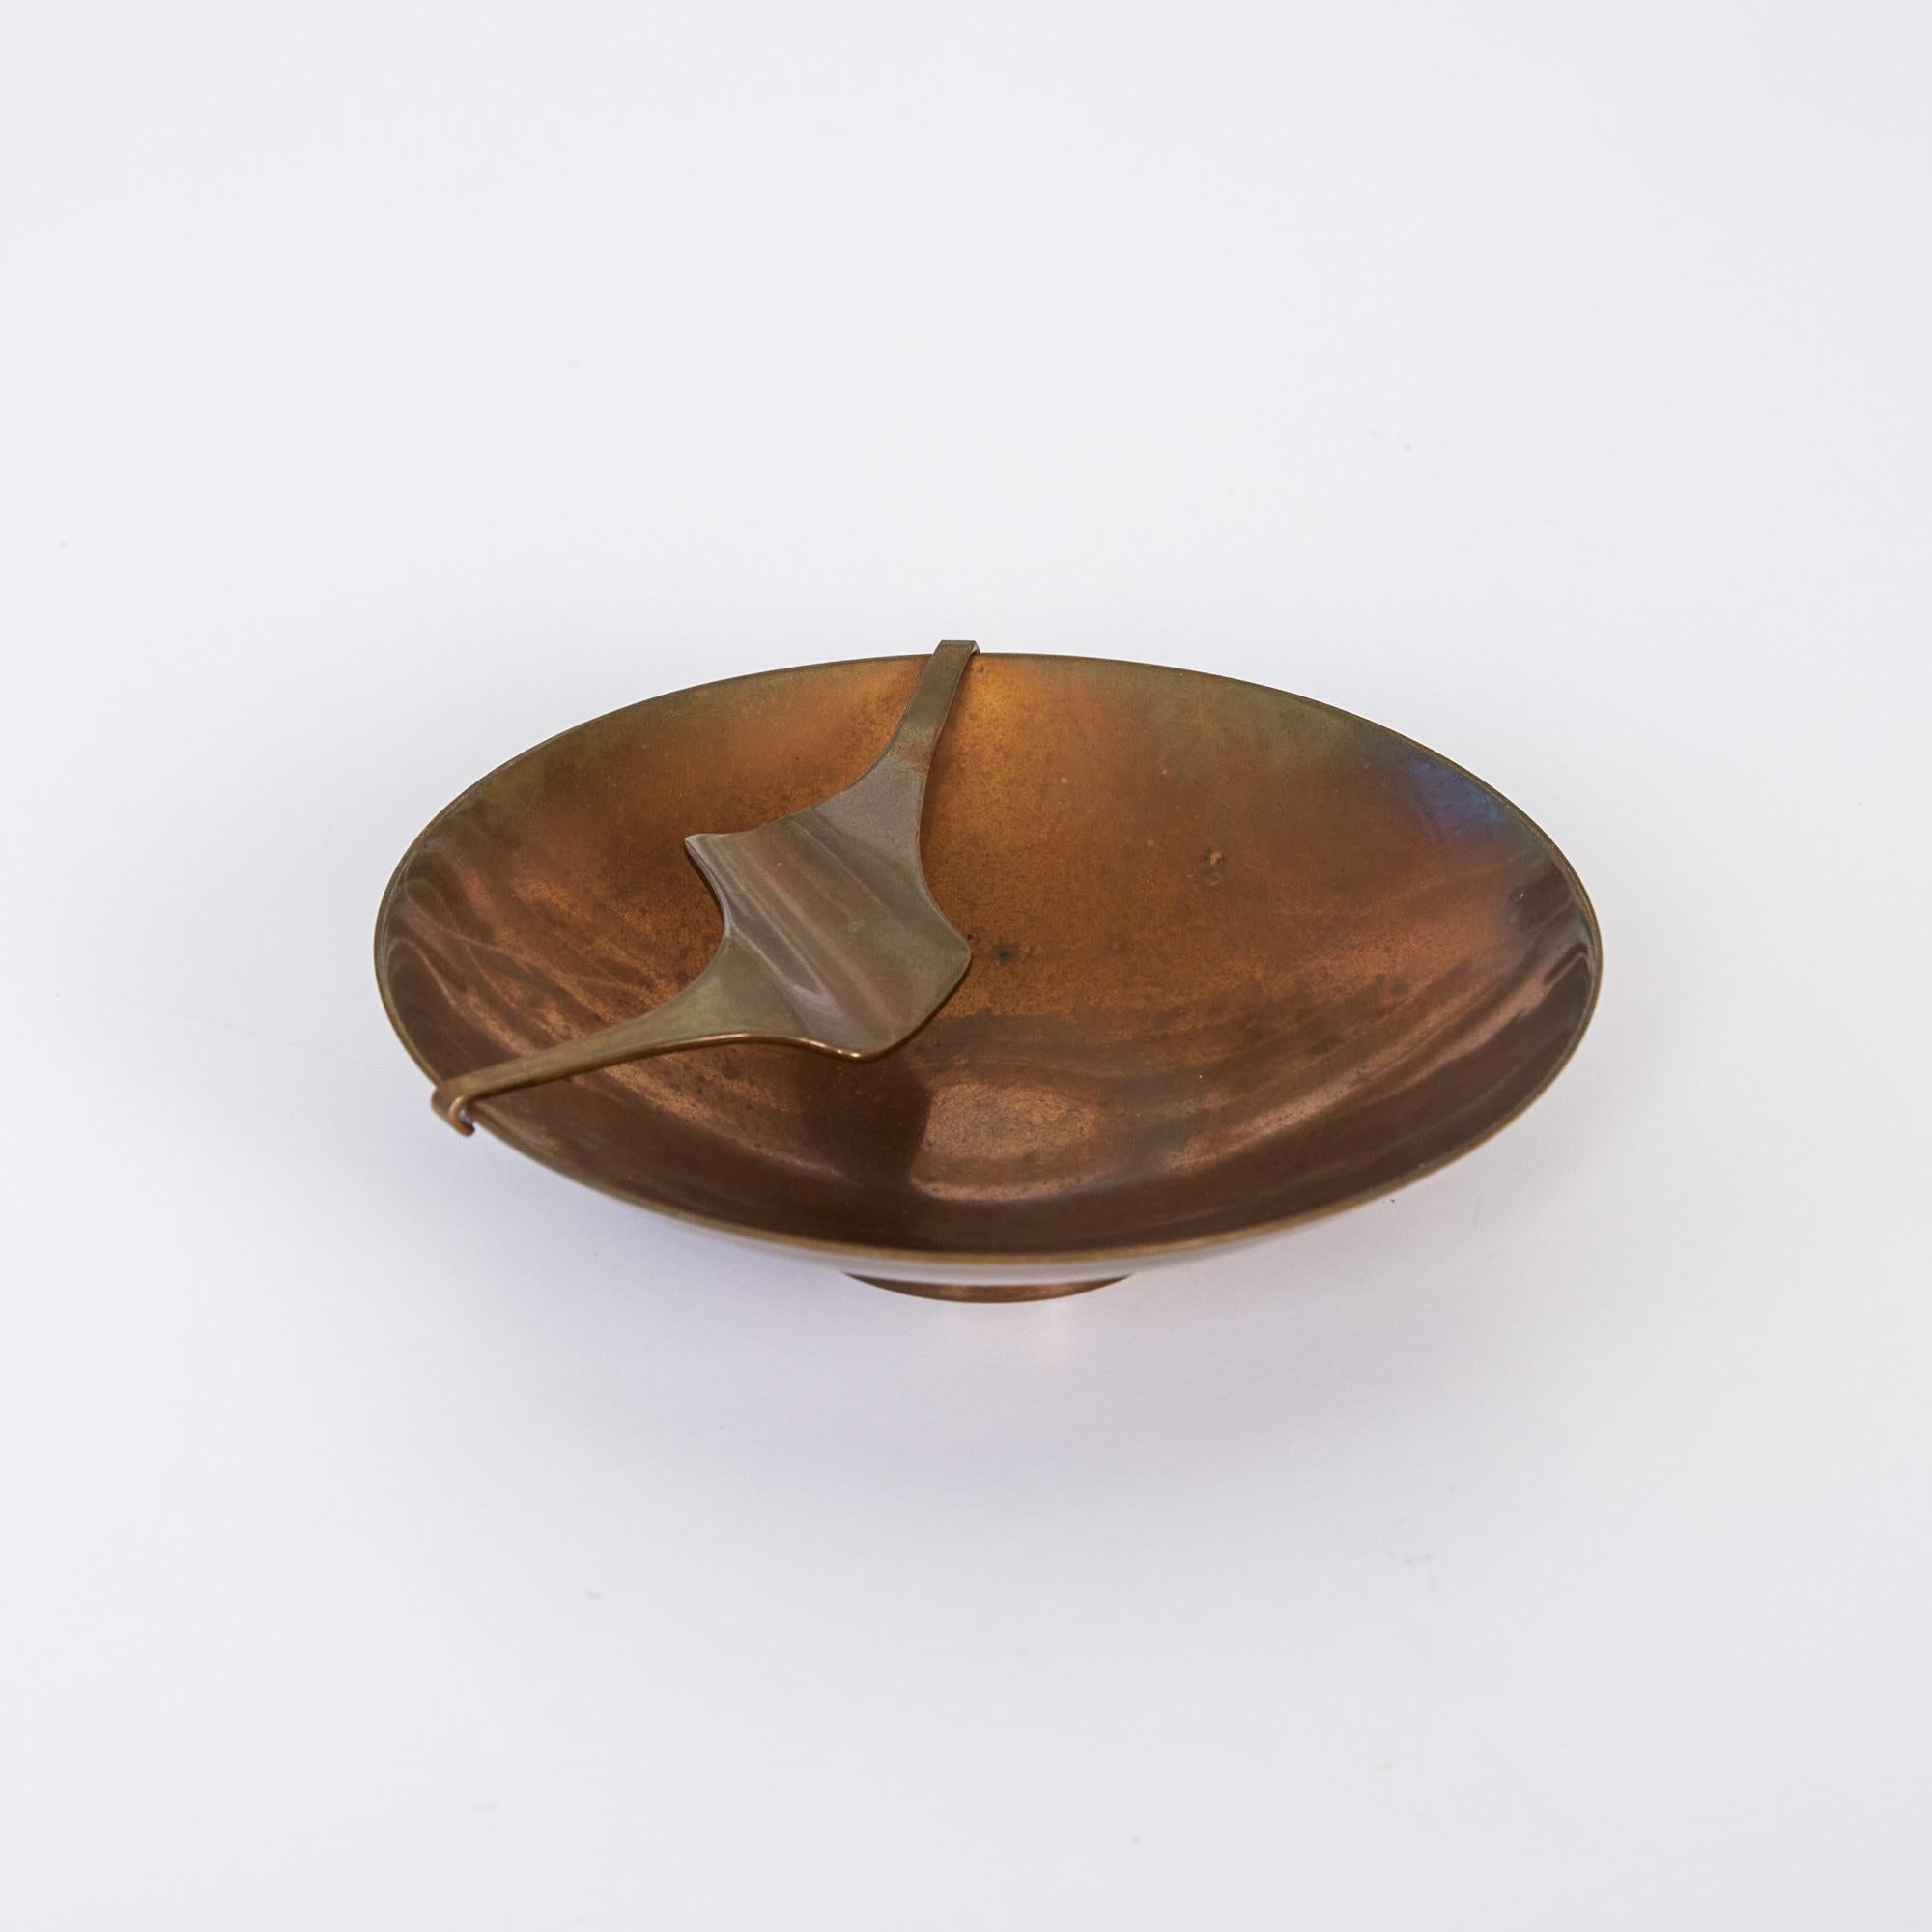 John Prip and Ronald Hayes Pearson bronze ashtray, by Metal Arts Co. Rochester NY, circa 1950s. The ashtray features a solid patinated brass bowl with minimalist foot. The top of the bowl features a decorative strip of bronze in a clean abstract